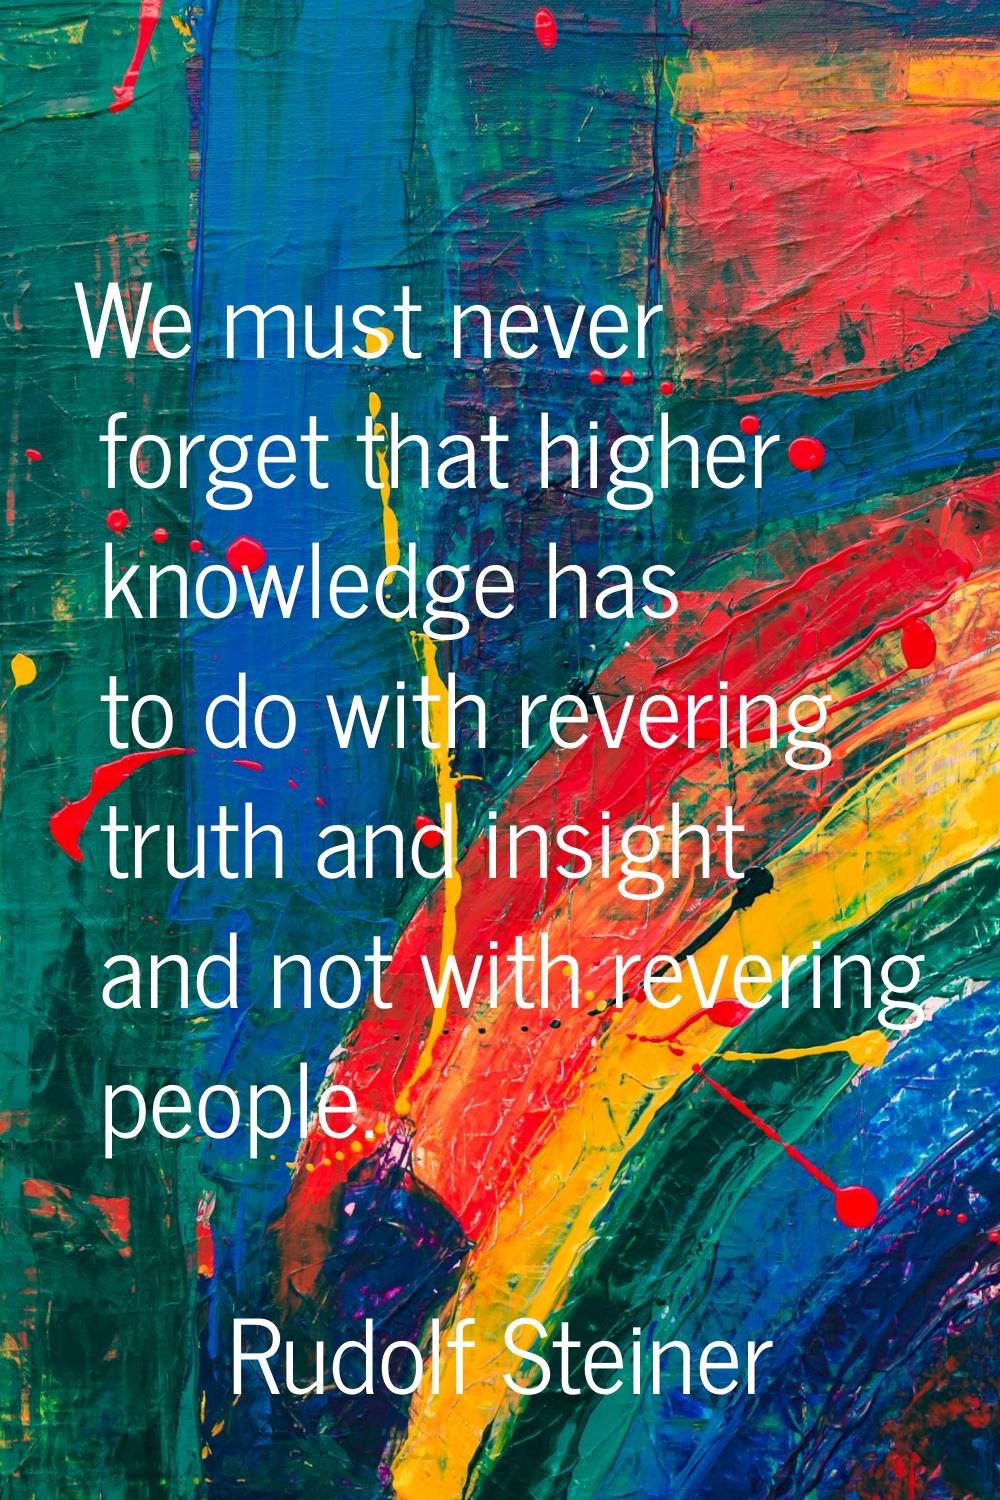 We must never forget that higher knowledge has to do with revering truth and insight and not with r